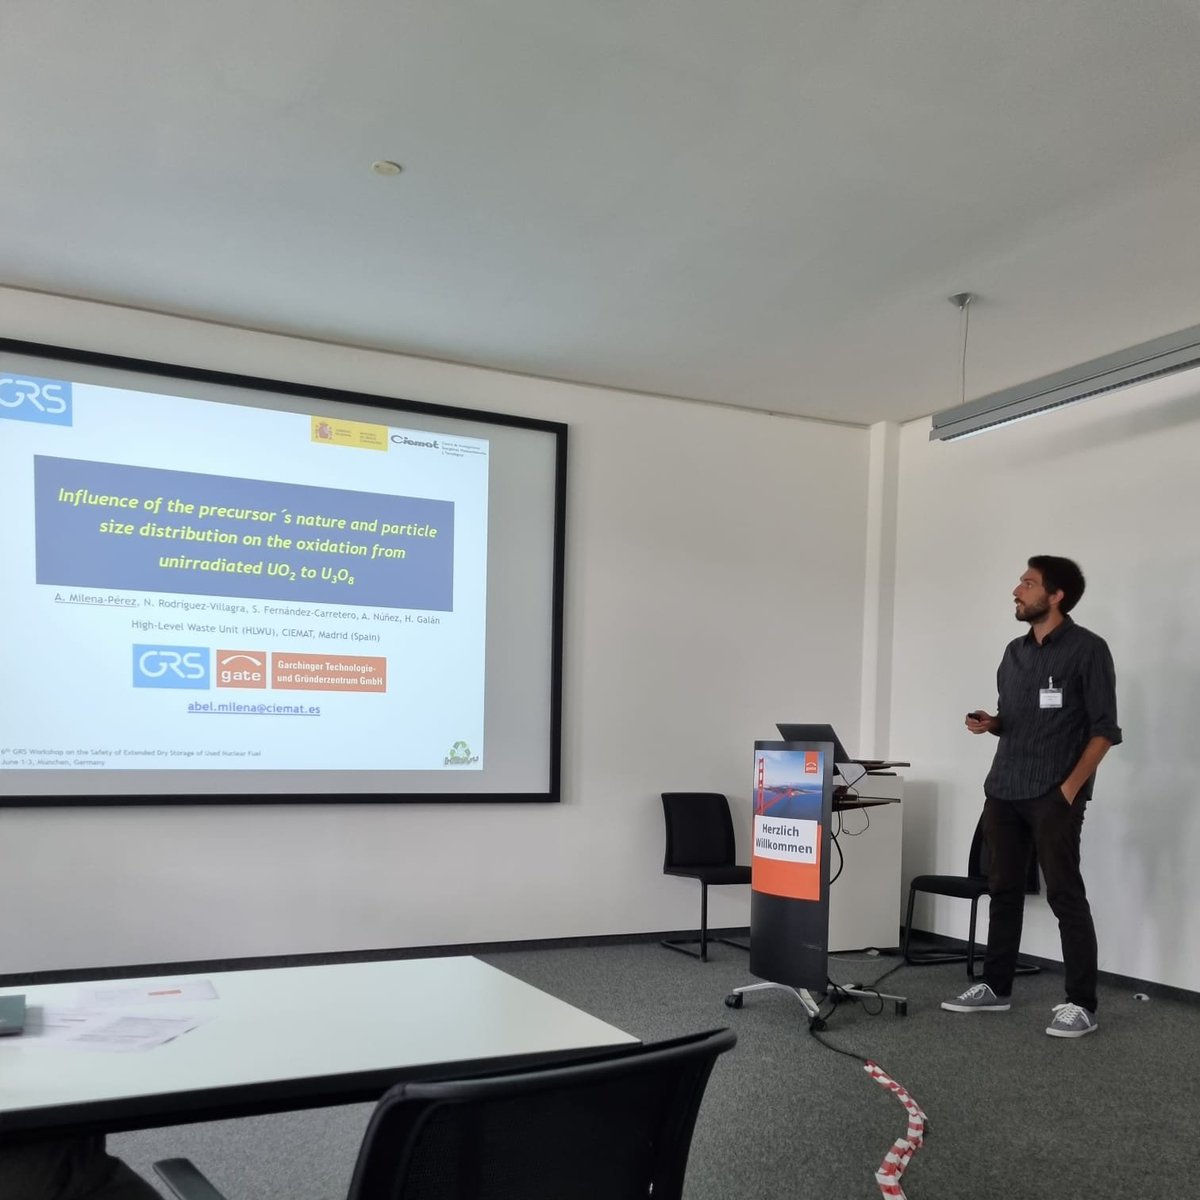 Abel Milena, a Ph D Student of the HLW Unit, has parti cipated in a workshop organised by the #GRS on the Safety of Extended Dry Storage of spent nuclear fuel (#SEDS), June 1-3, 2022 in Garching, Germany.
grs.de/en/news/events…
#Radioactive #DryStorage #Waste #Science #Nuclear.